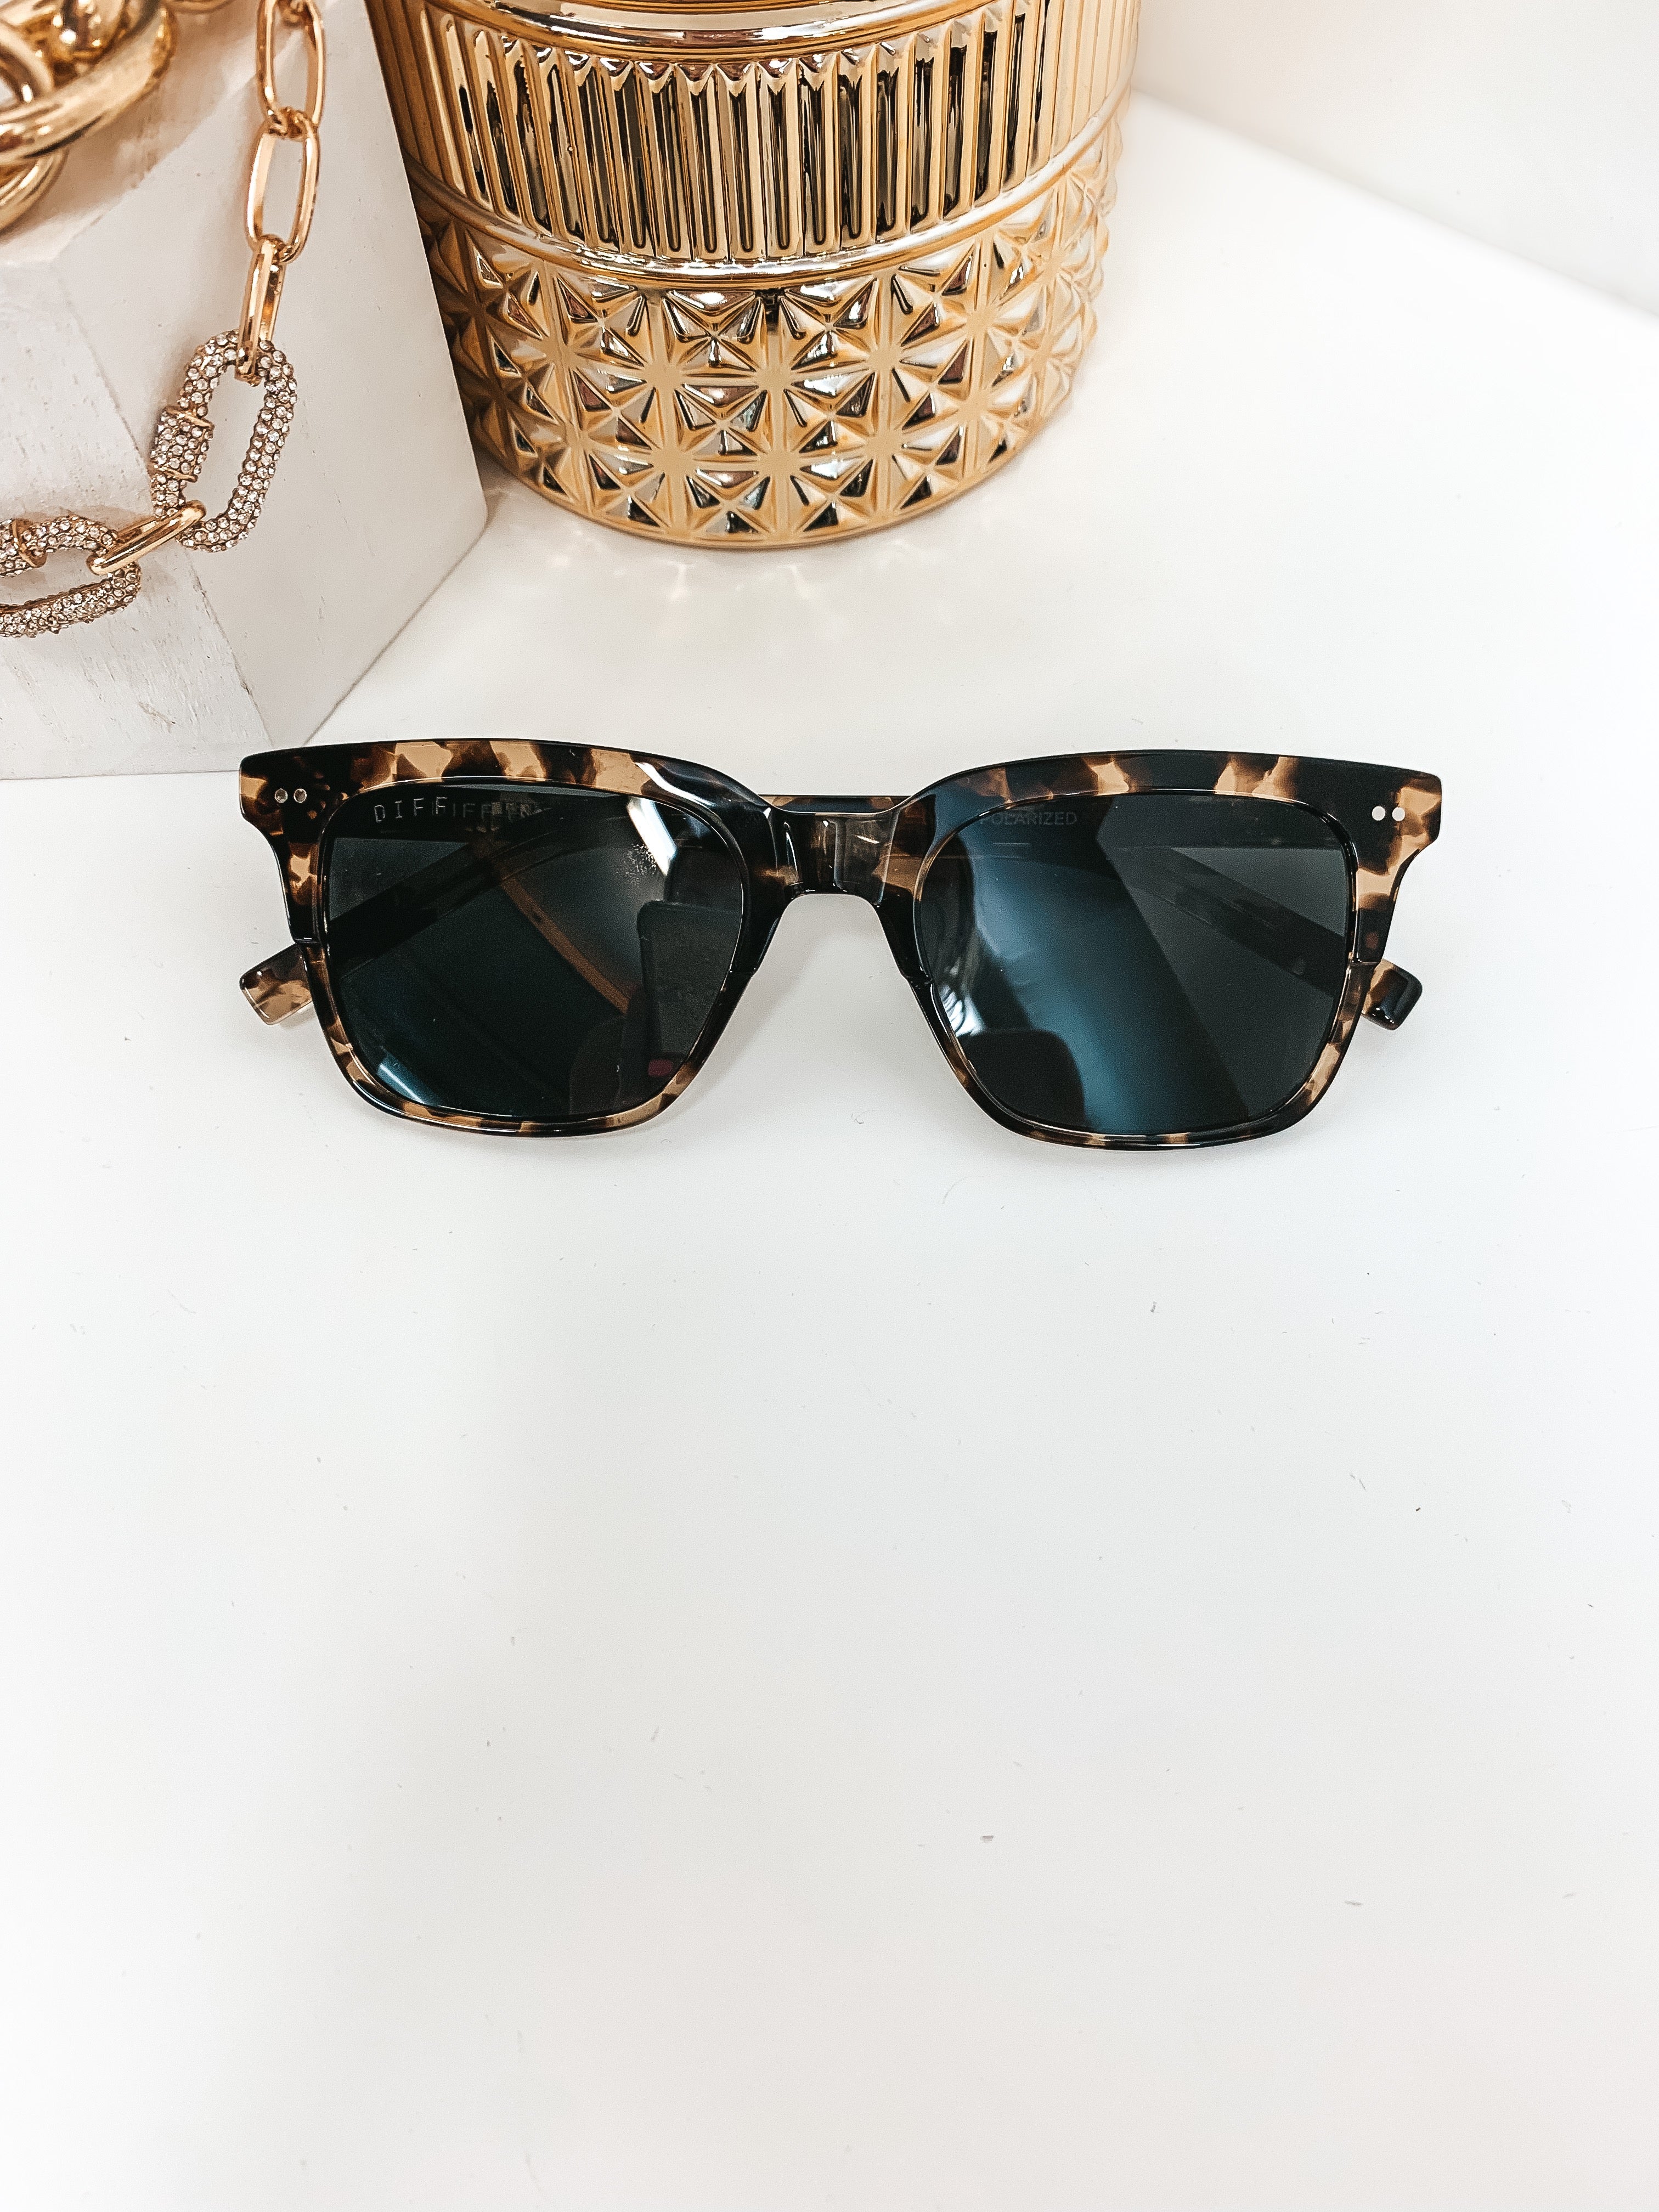 DIFF | Billie Polarized Grey Lens Sunglasses in Espresso Tortoise - Giddy Up Glamour Boutique